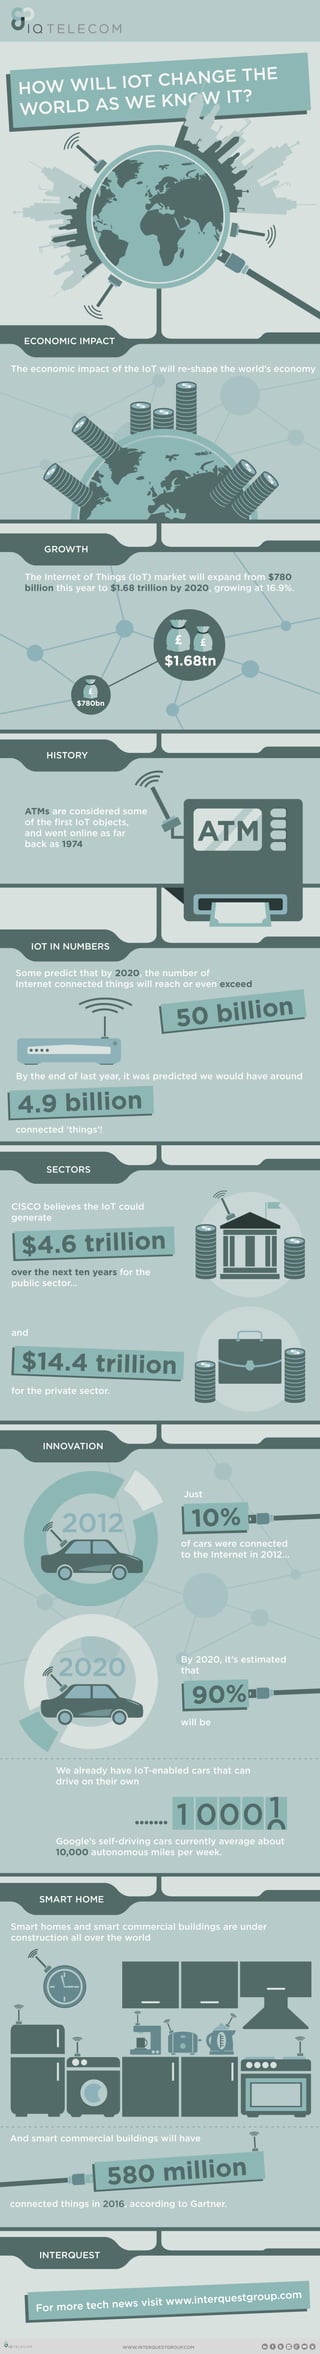 [Infographic] How will Internet of Things (IoT) change the world as we know it?